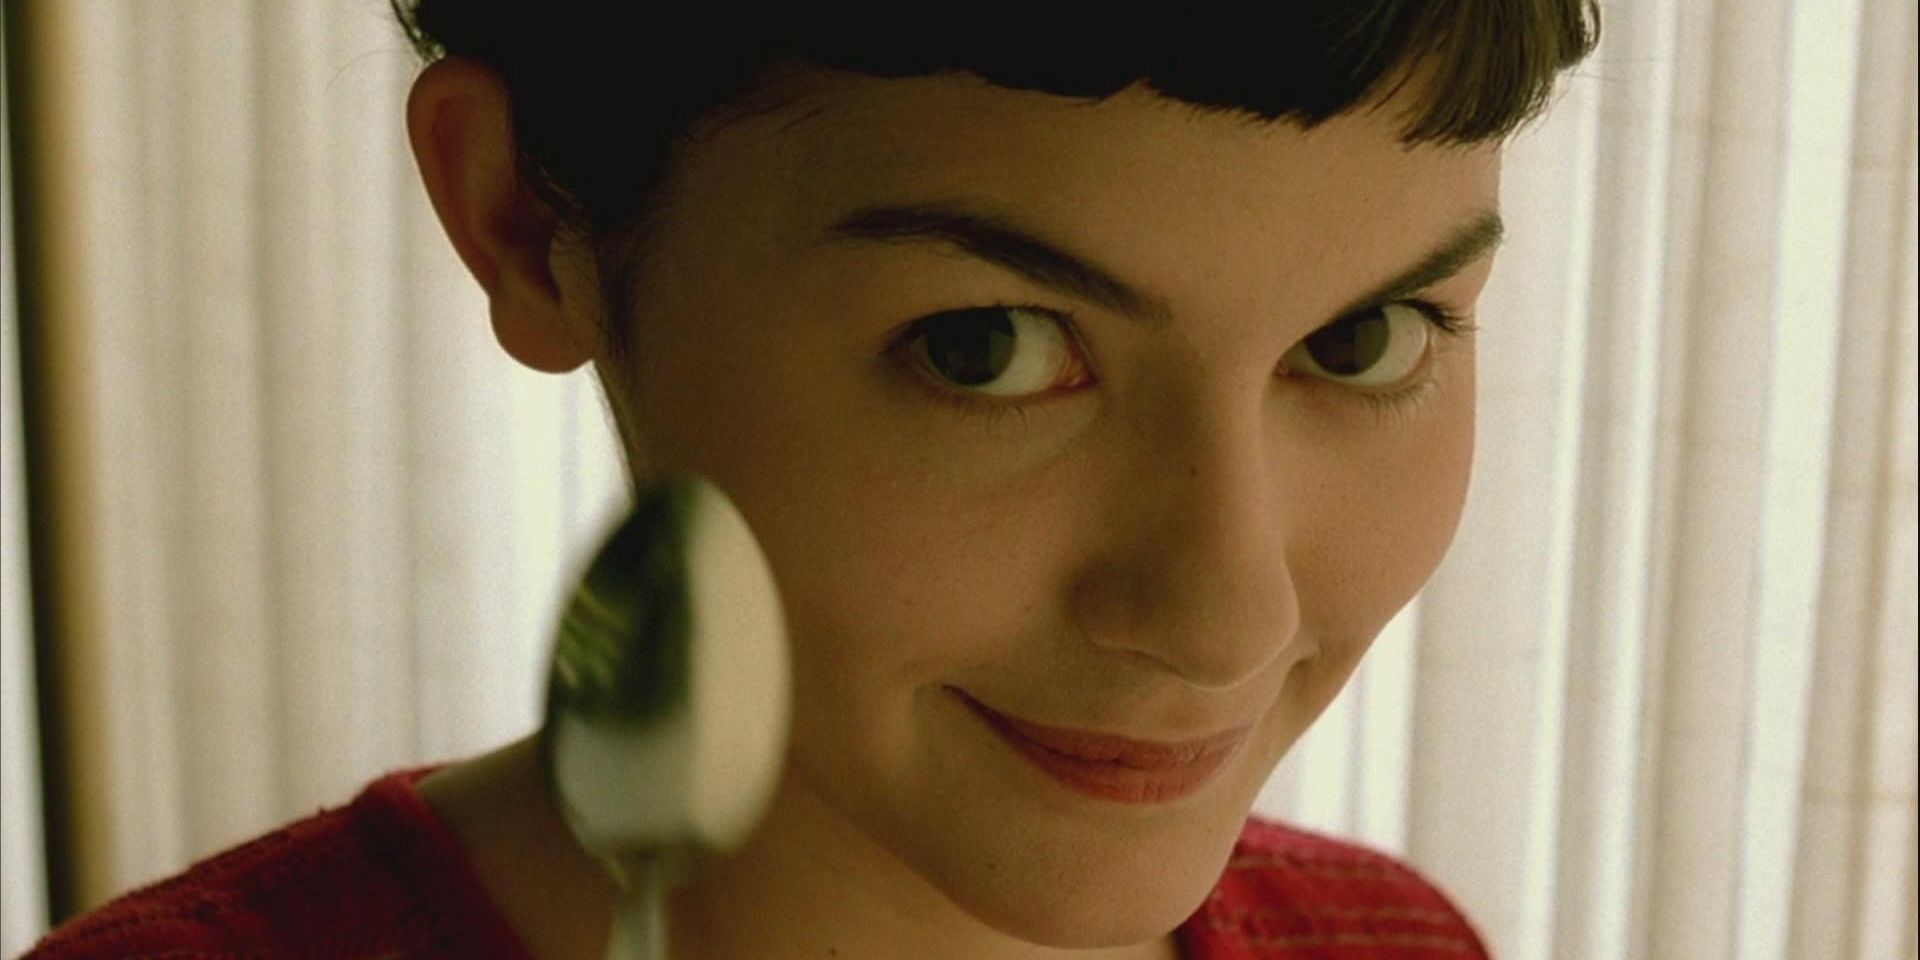 Audrey Tautou in Amelie holding a spoon and smiling at camera.